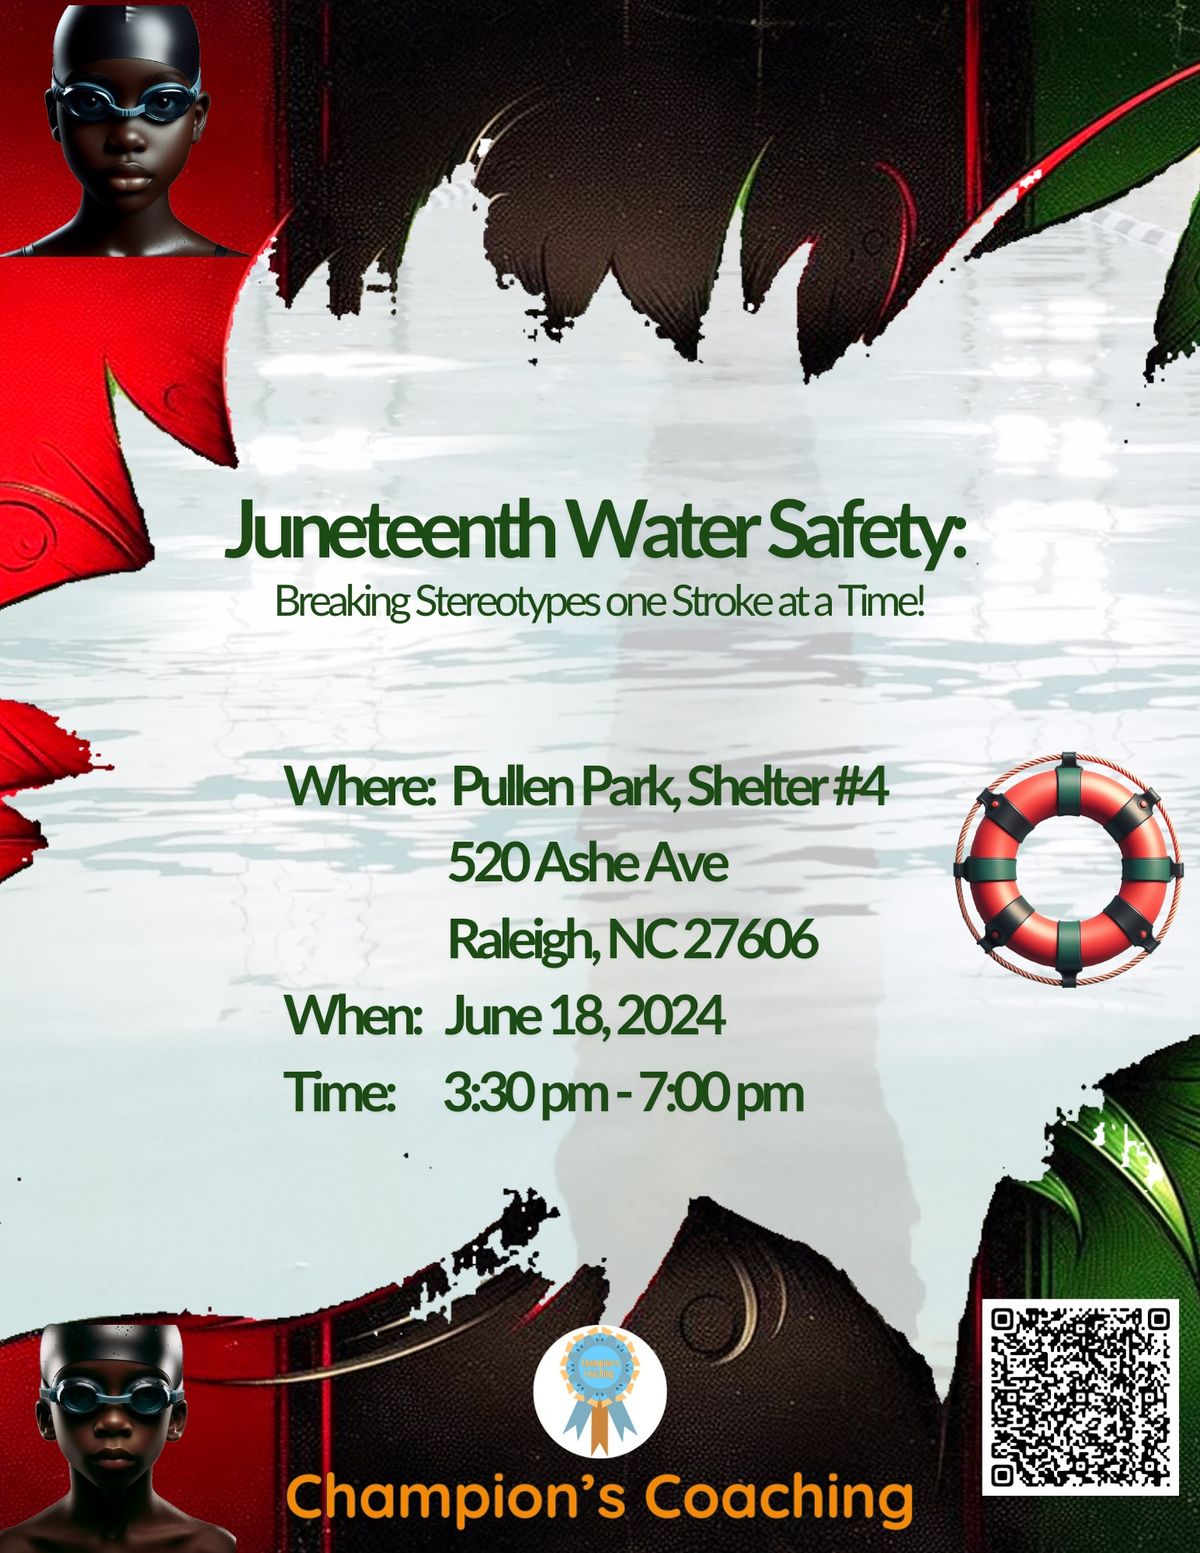 Juneteenth Water Safety: Breaking Stereotypes one Stroke at a Time!